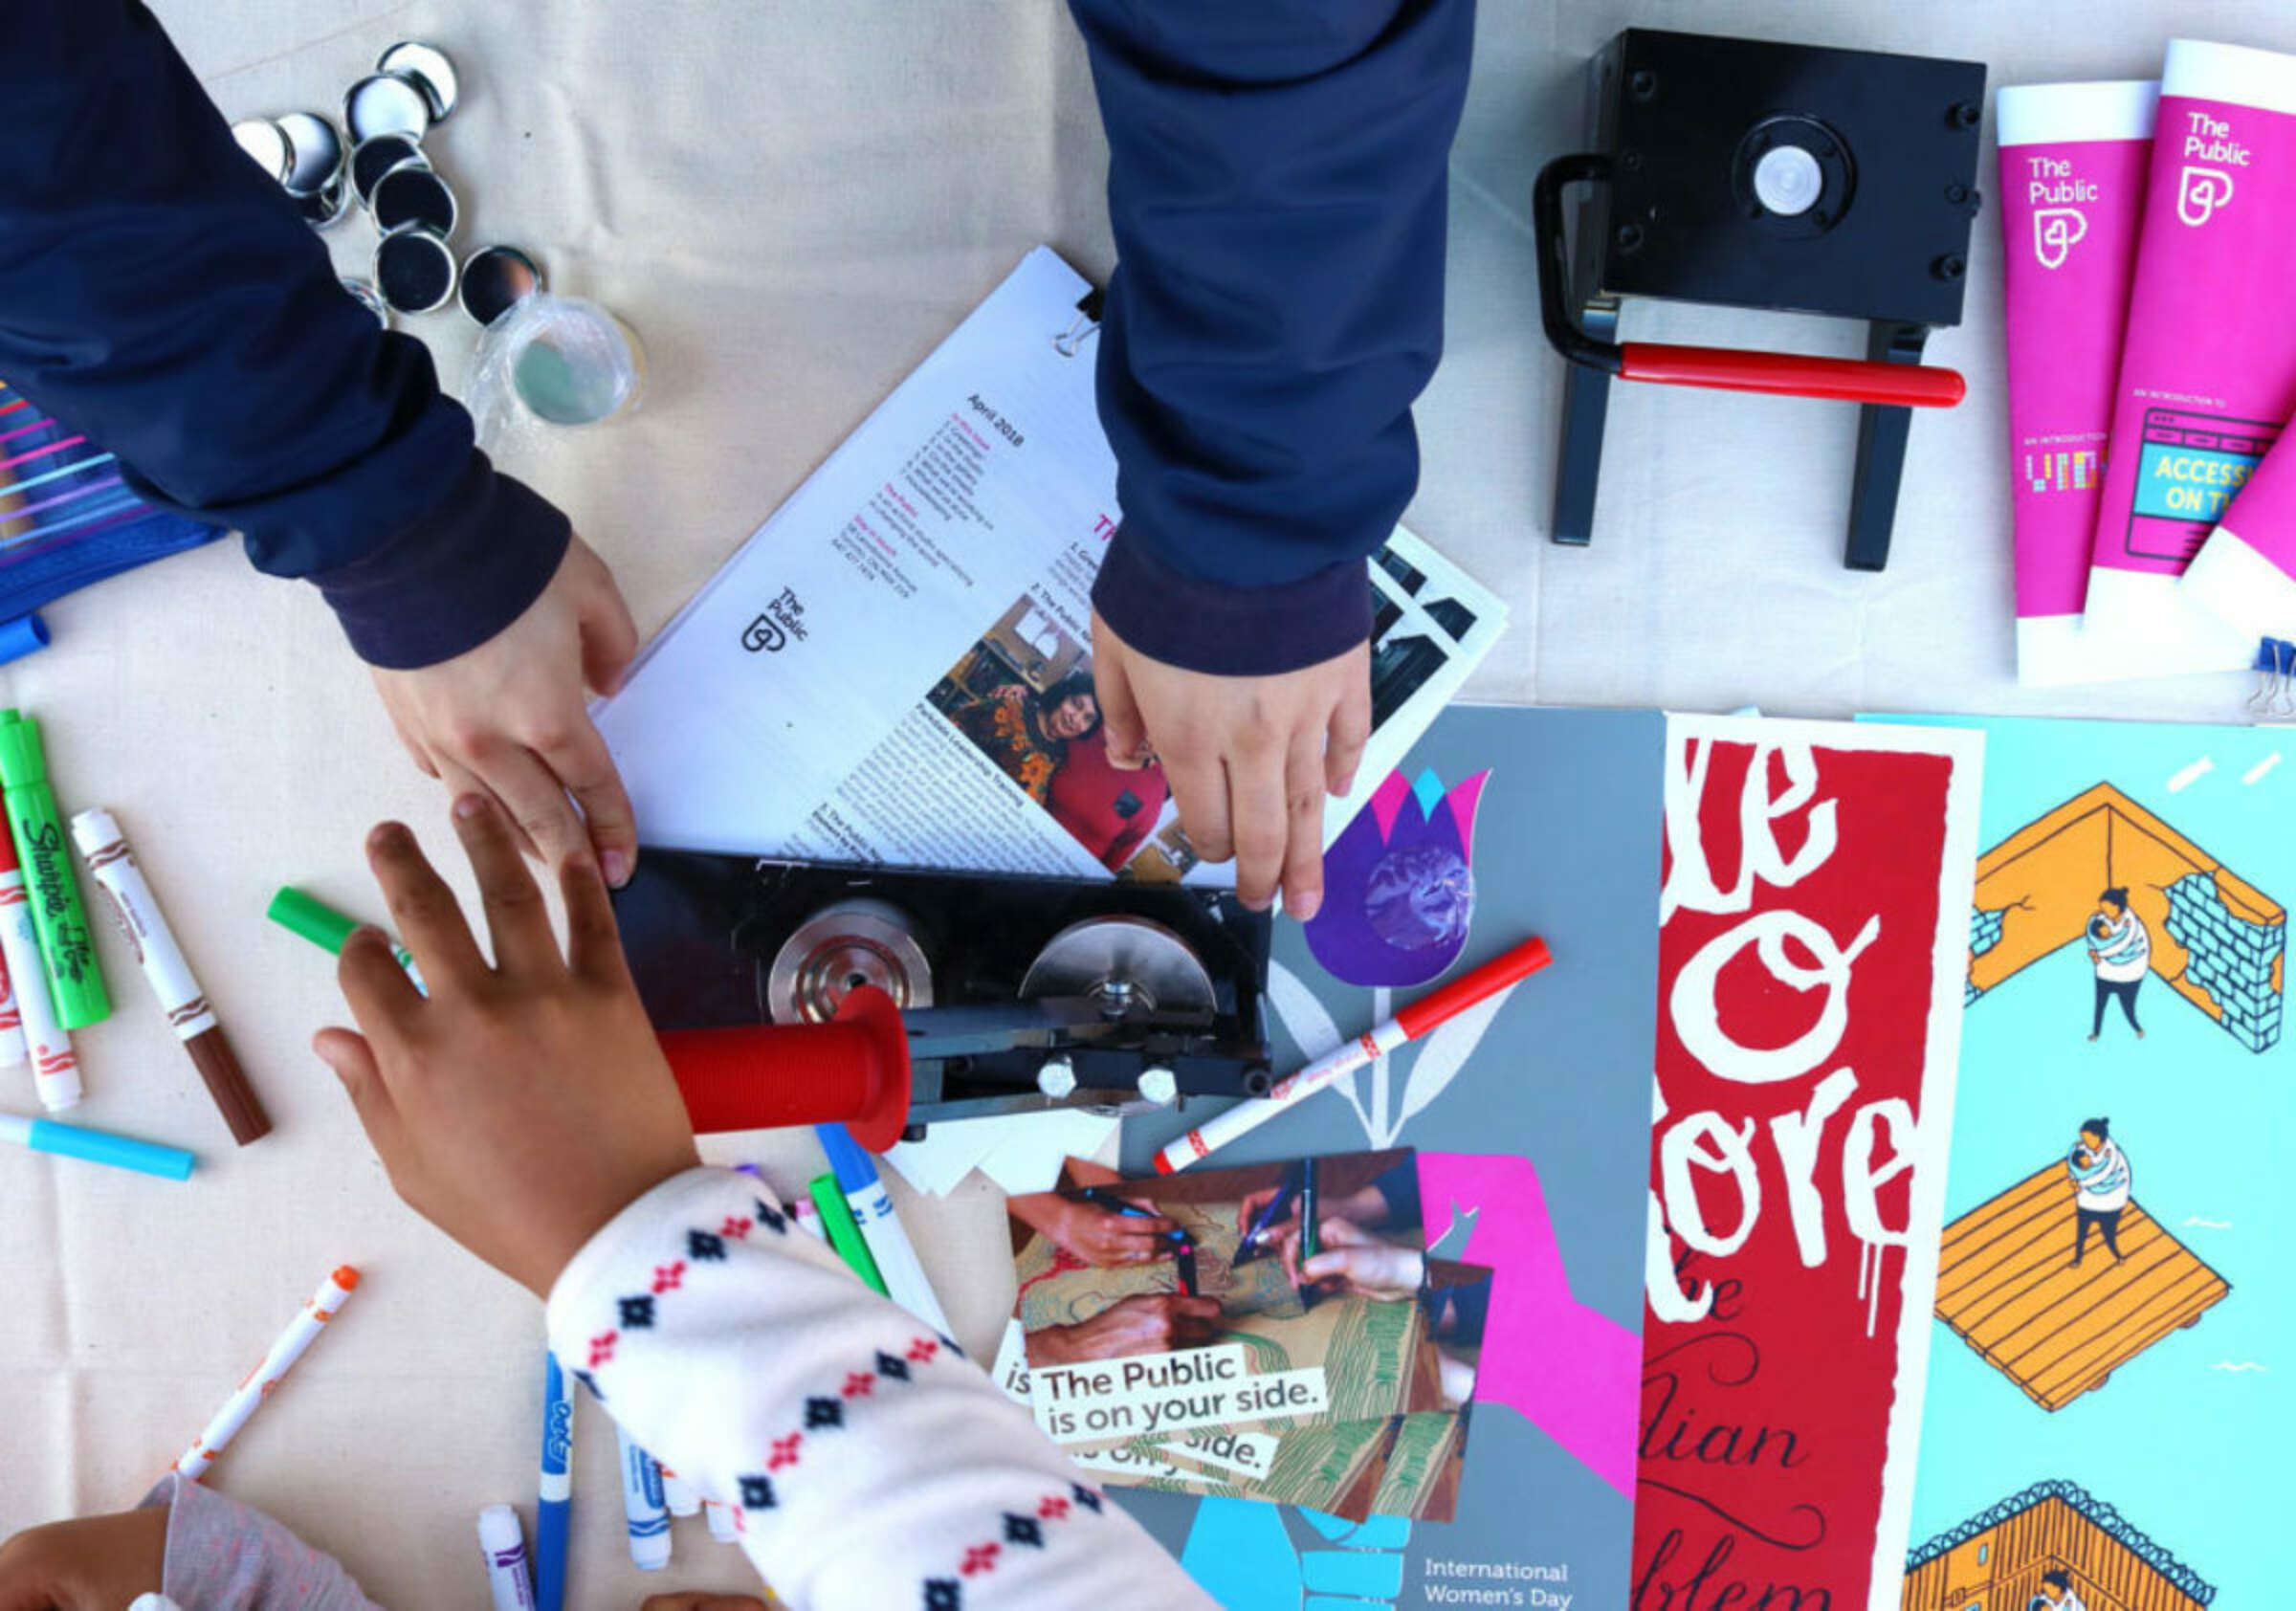 Three people work on an arts and crafts project on a table, with various supplies scattered around, including markers, magazines, and a book binding press. Their hands are engaged with the materials, and some colorful artwork is visible on the table.